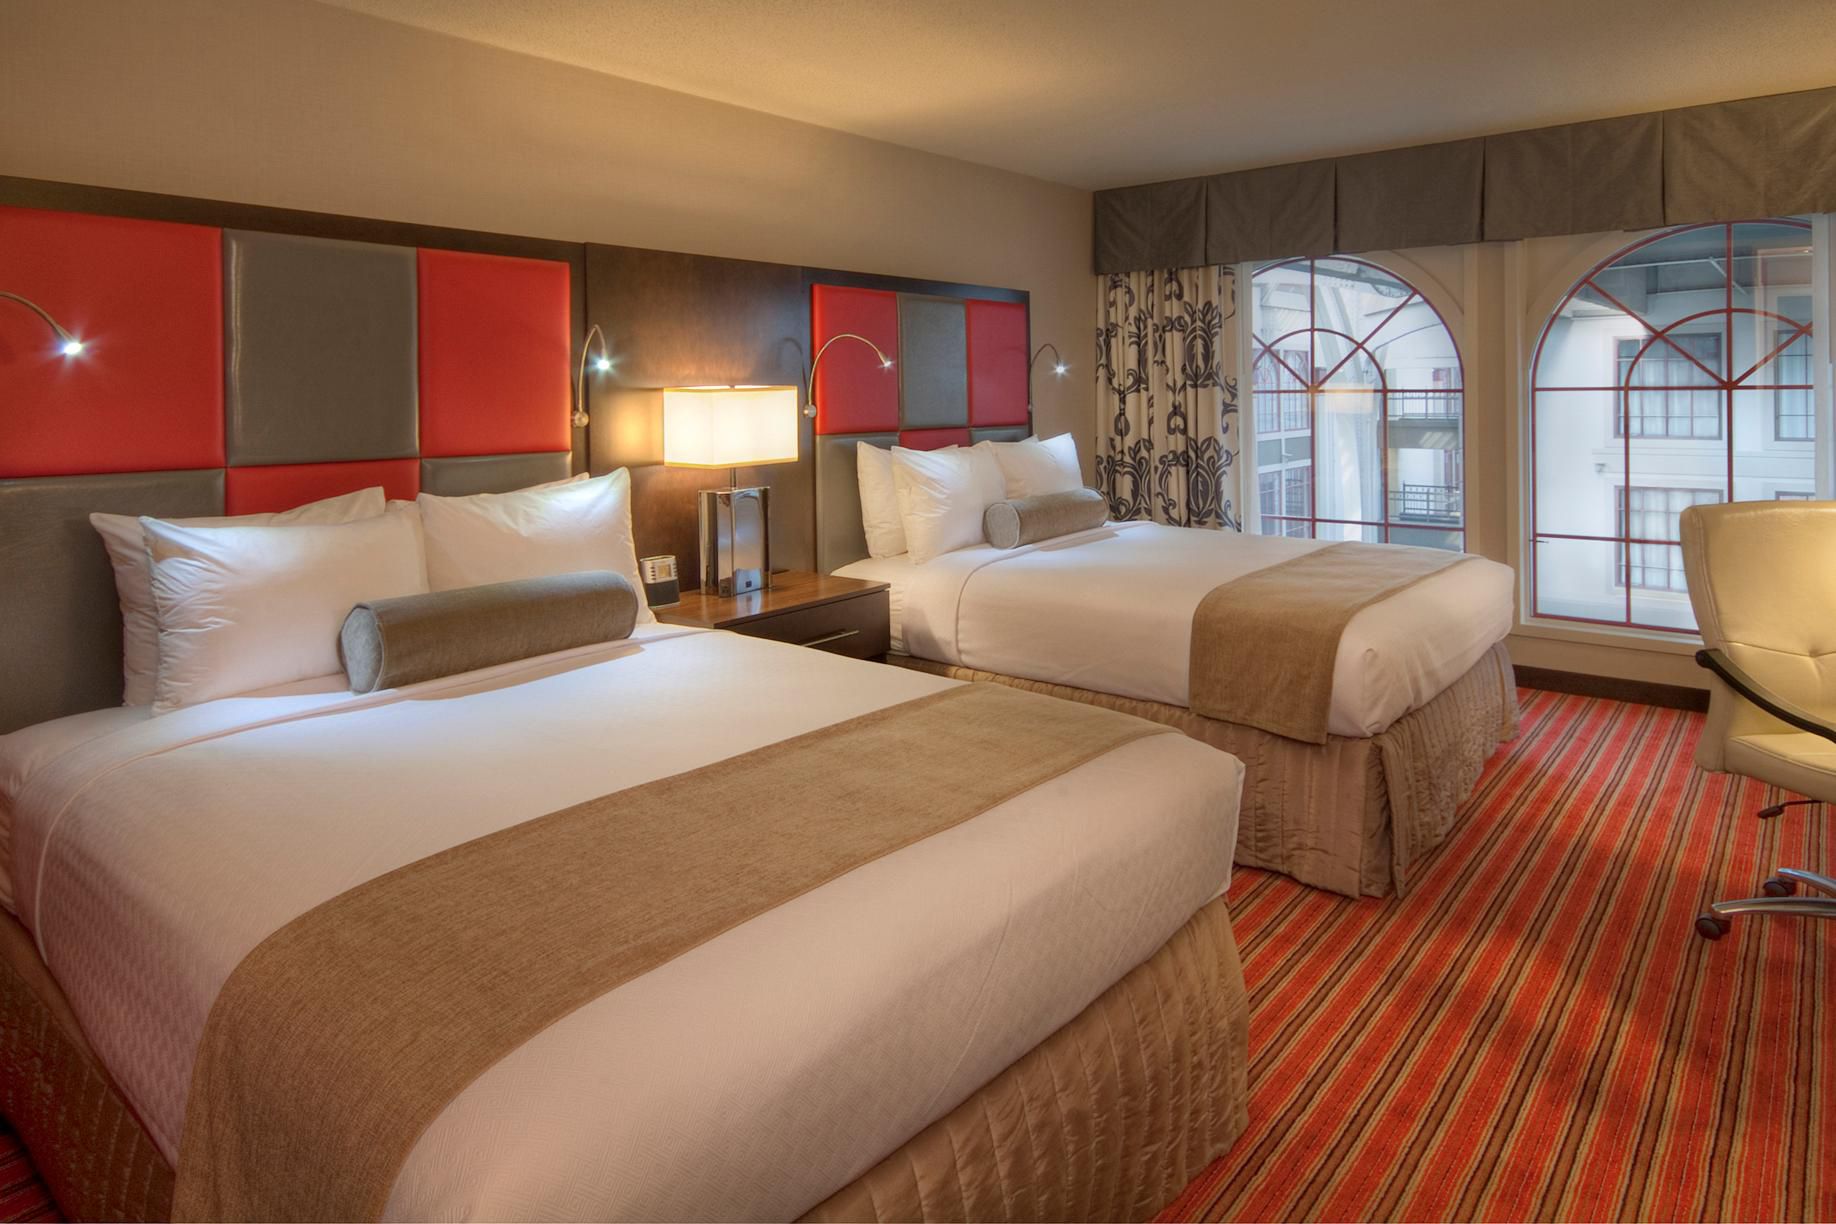 Make yourself at home in our queen guest rooms.